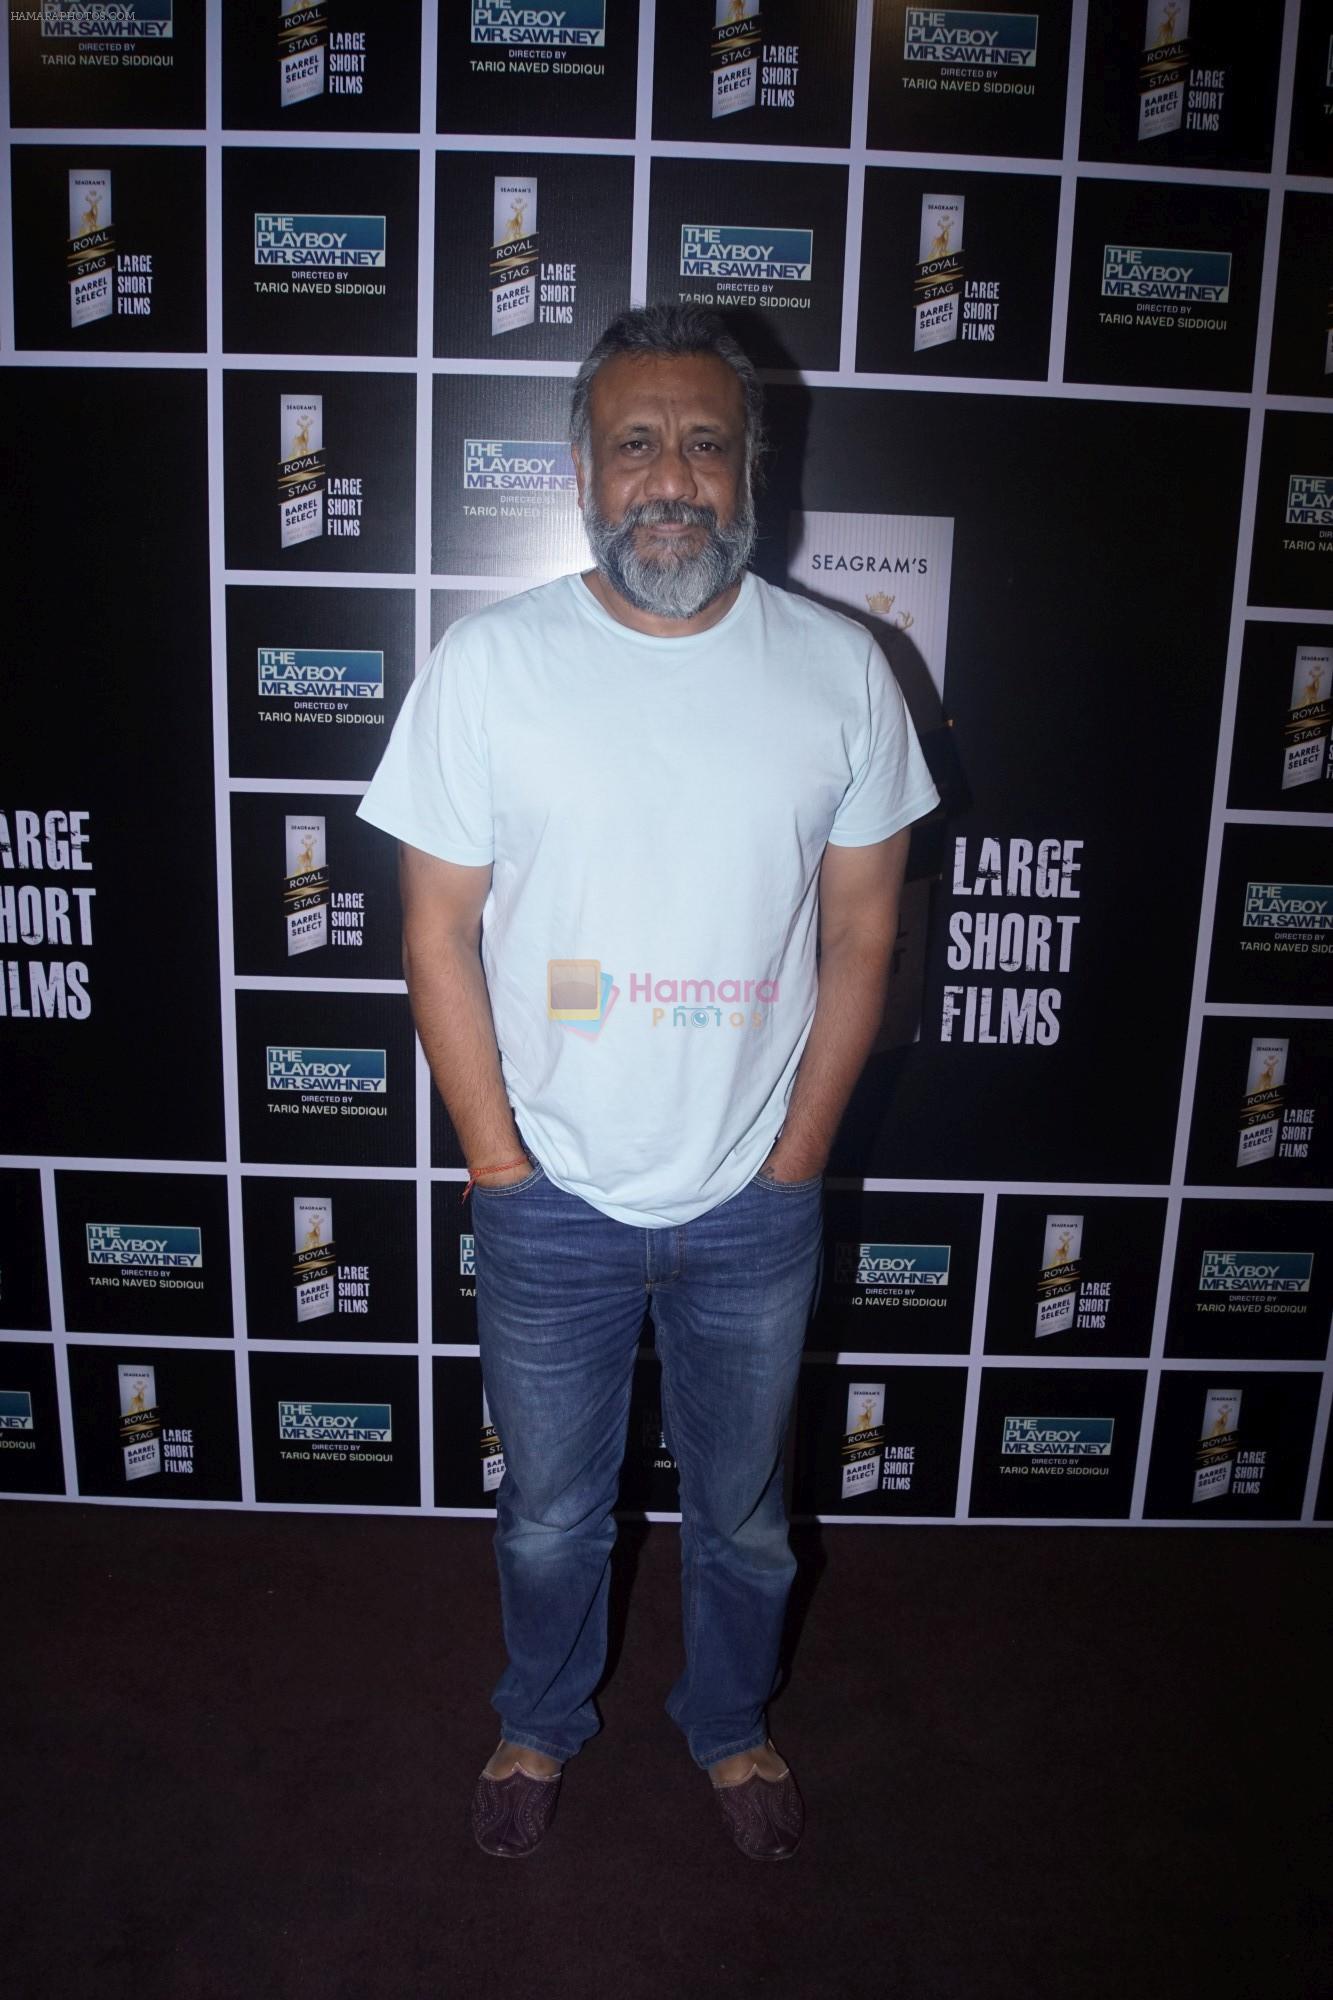 Anubhav Sinha at the Special Screening of Royal Stag Barrel Short Film The Playboy Mr.Sawhney on 24th Oct 2018